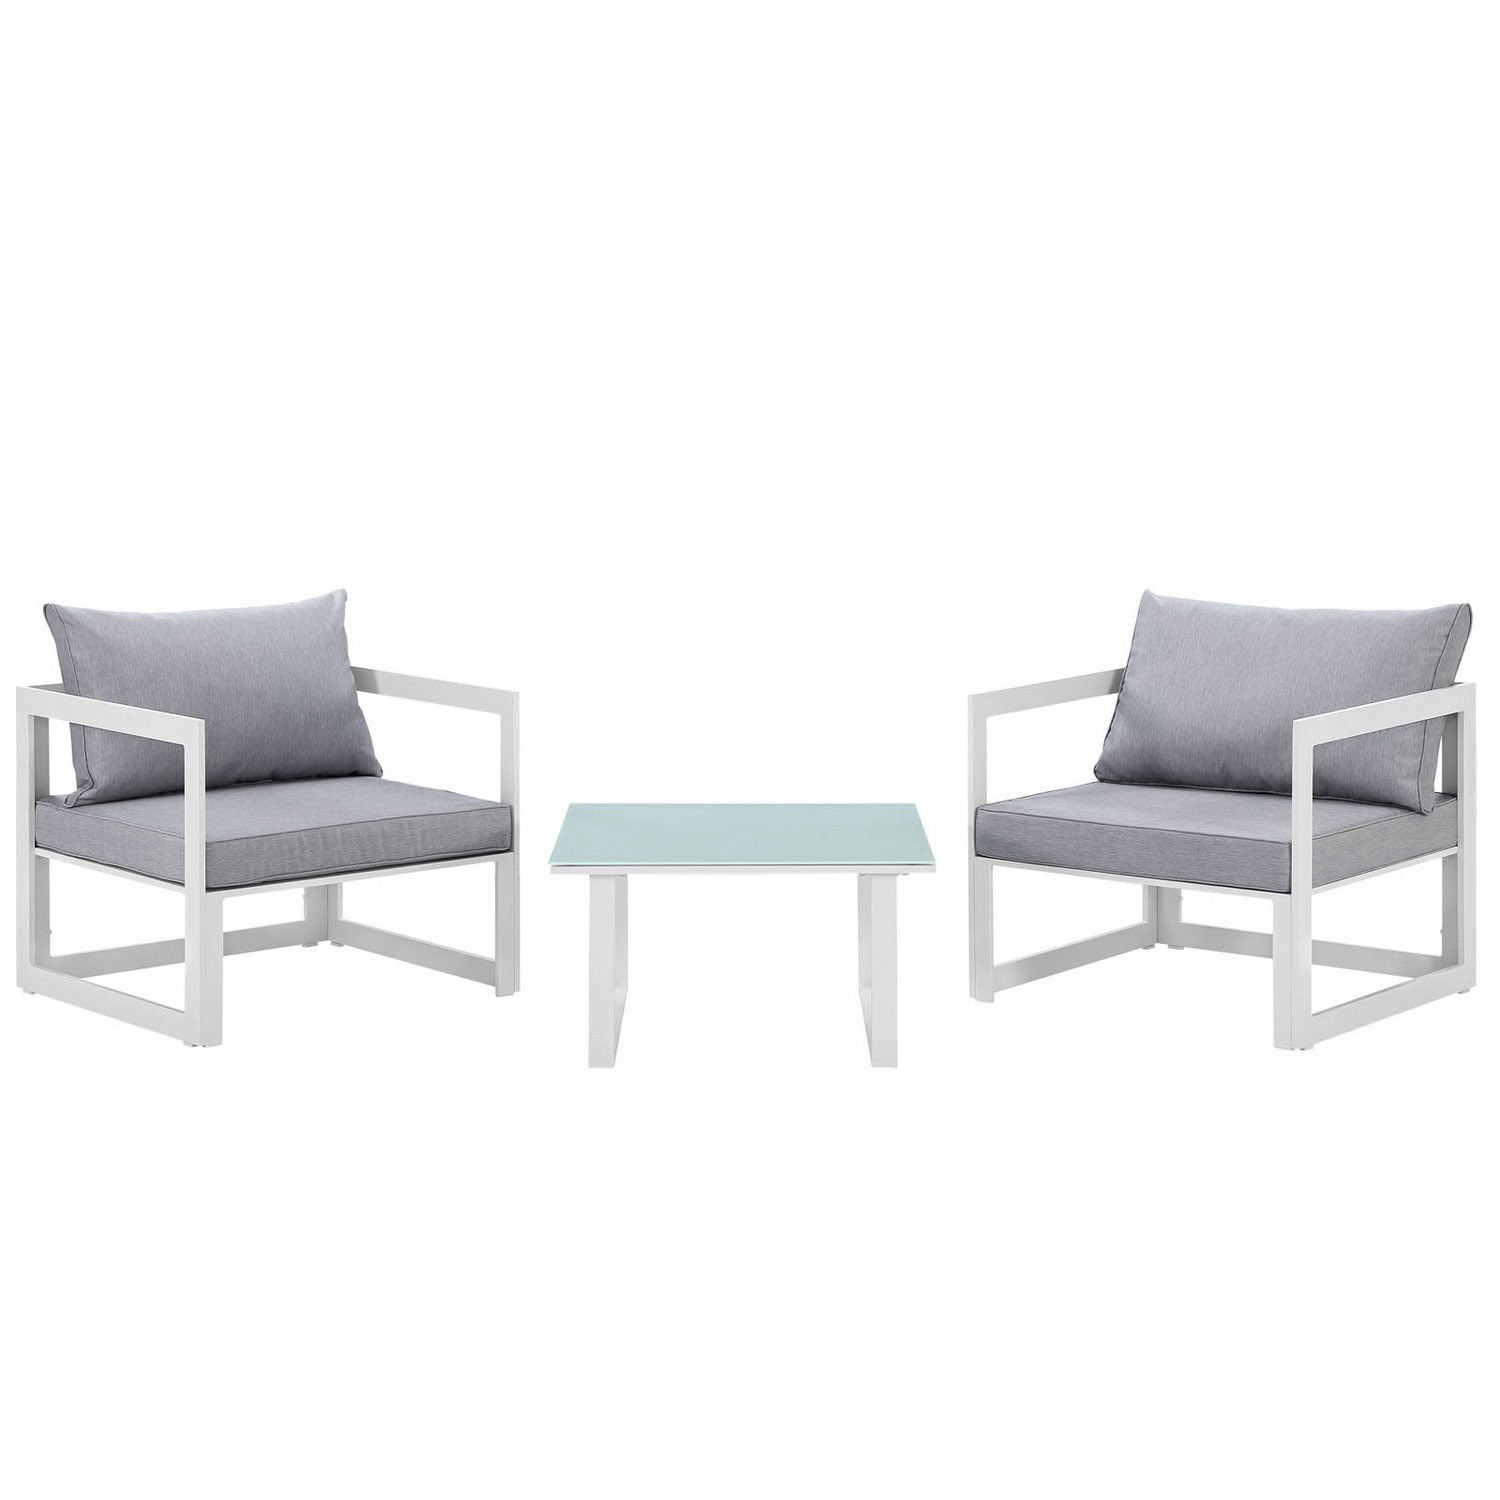 Modway Fortuna 3 Piece Outdoor Patio Sectional Sofa Set - White/Gray